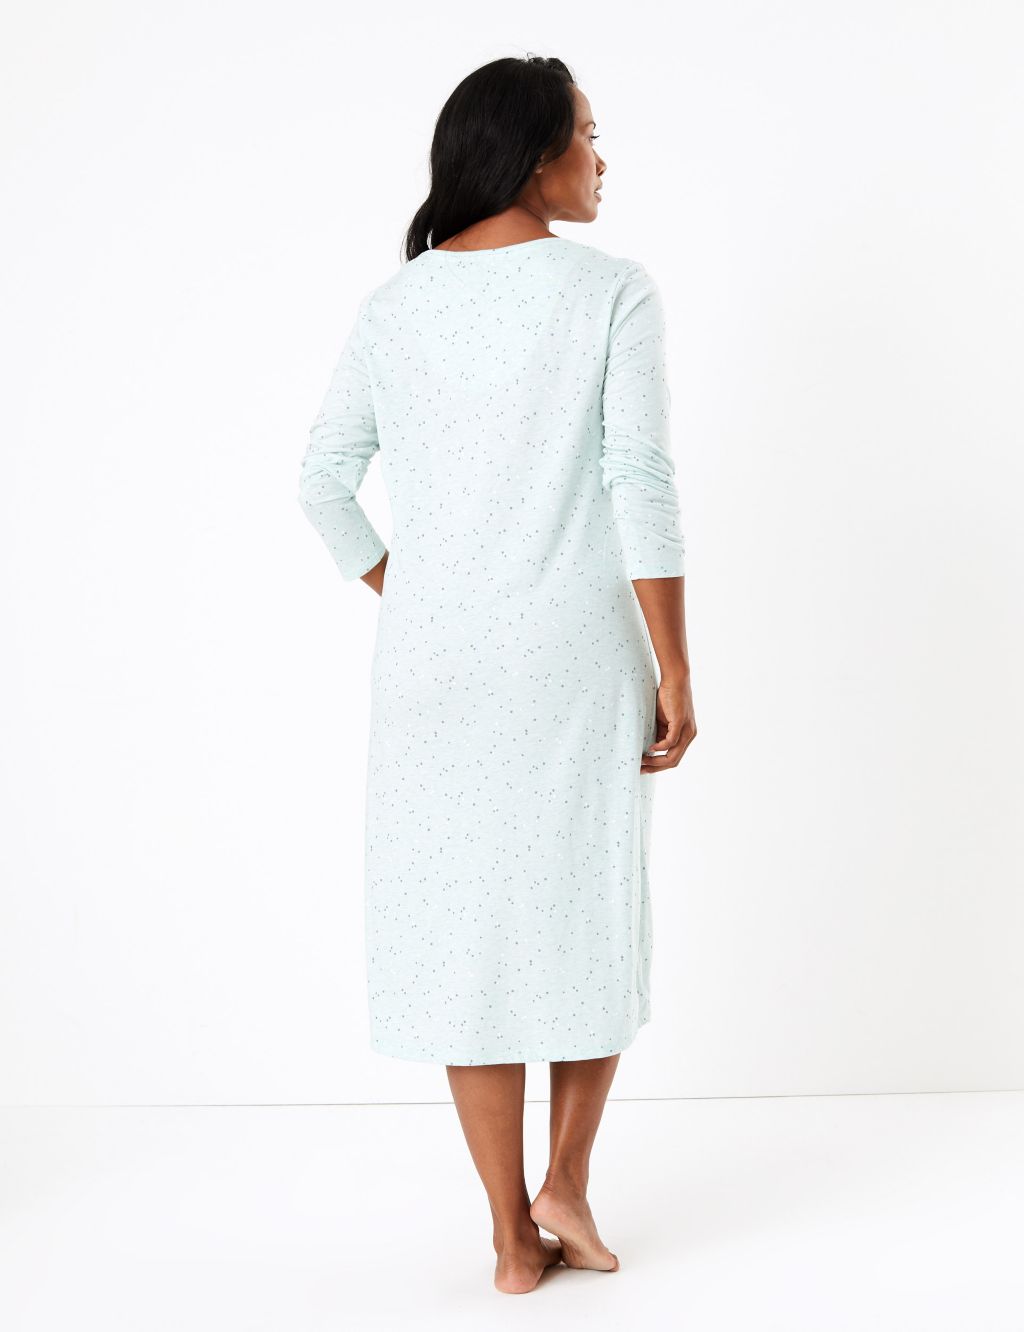 Cool Comfort™ Cotton Modal Spot Print Nightdress | M&S Collection | M&S